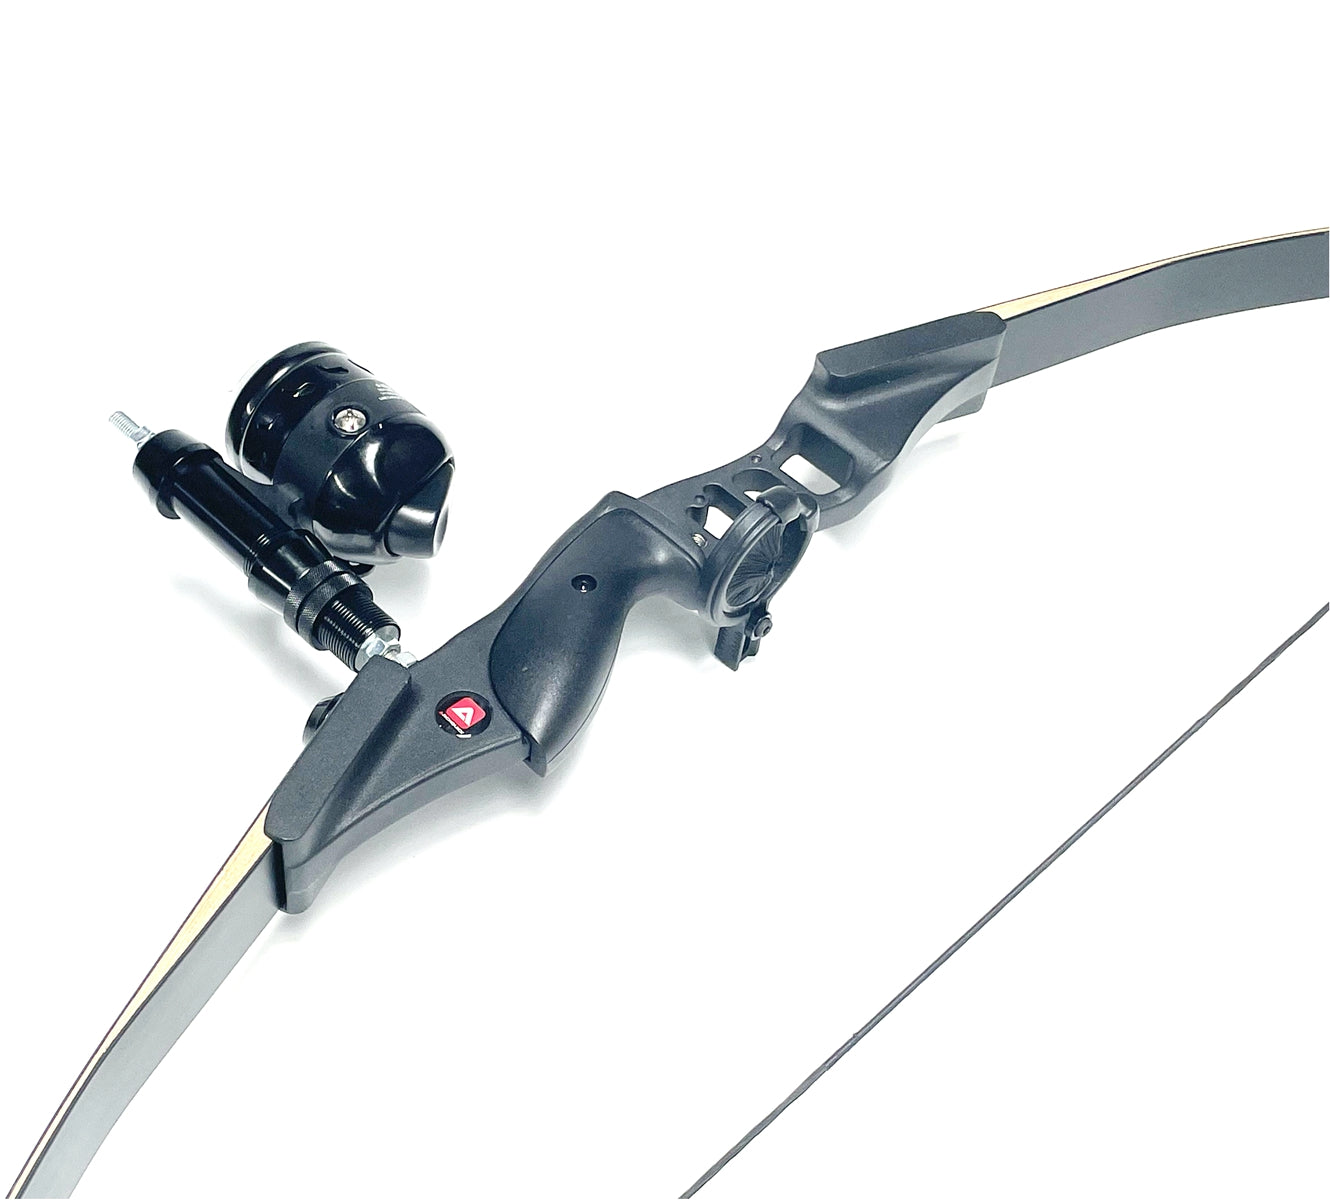 Archquick Bow fishing Bow Kit Recurve Bow Ready to Shoot Bowfishing 30-50lbs